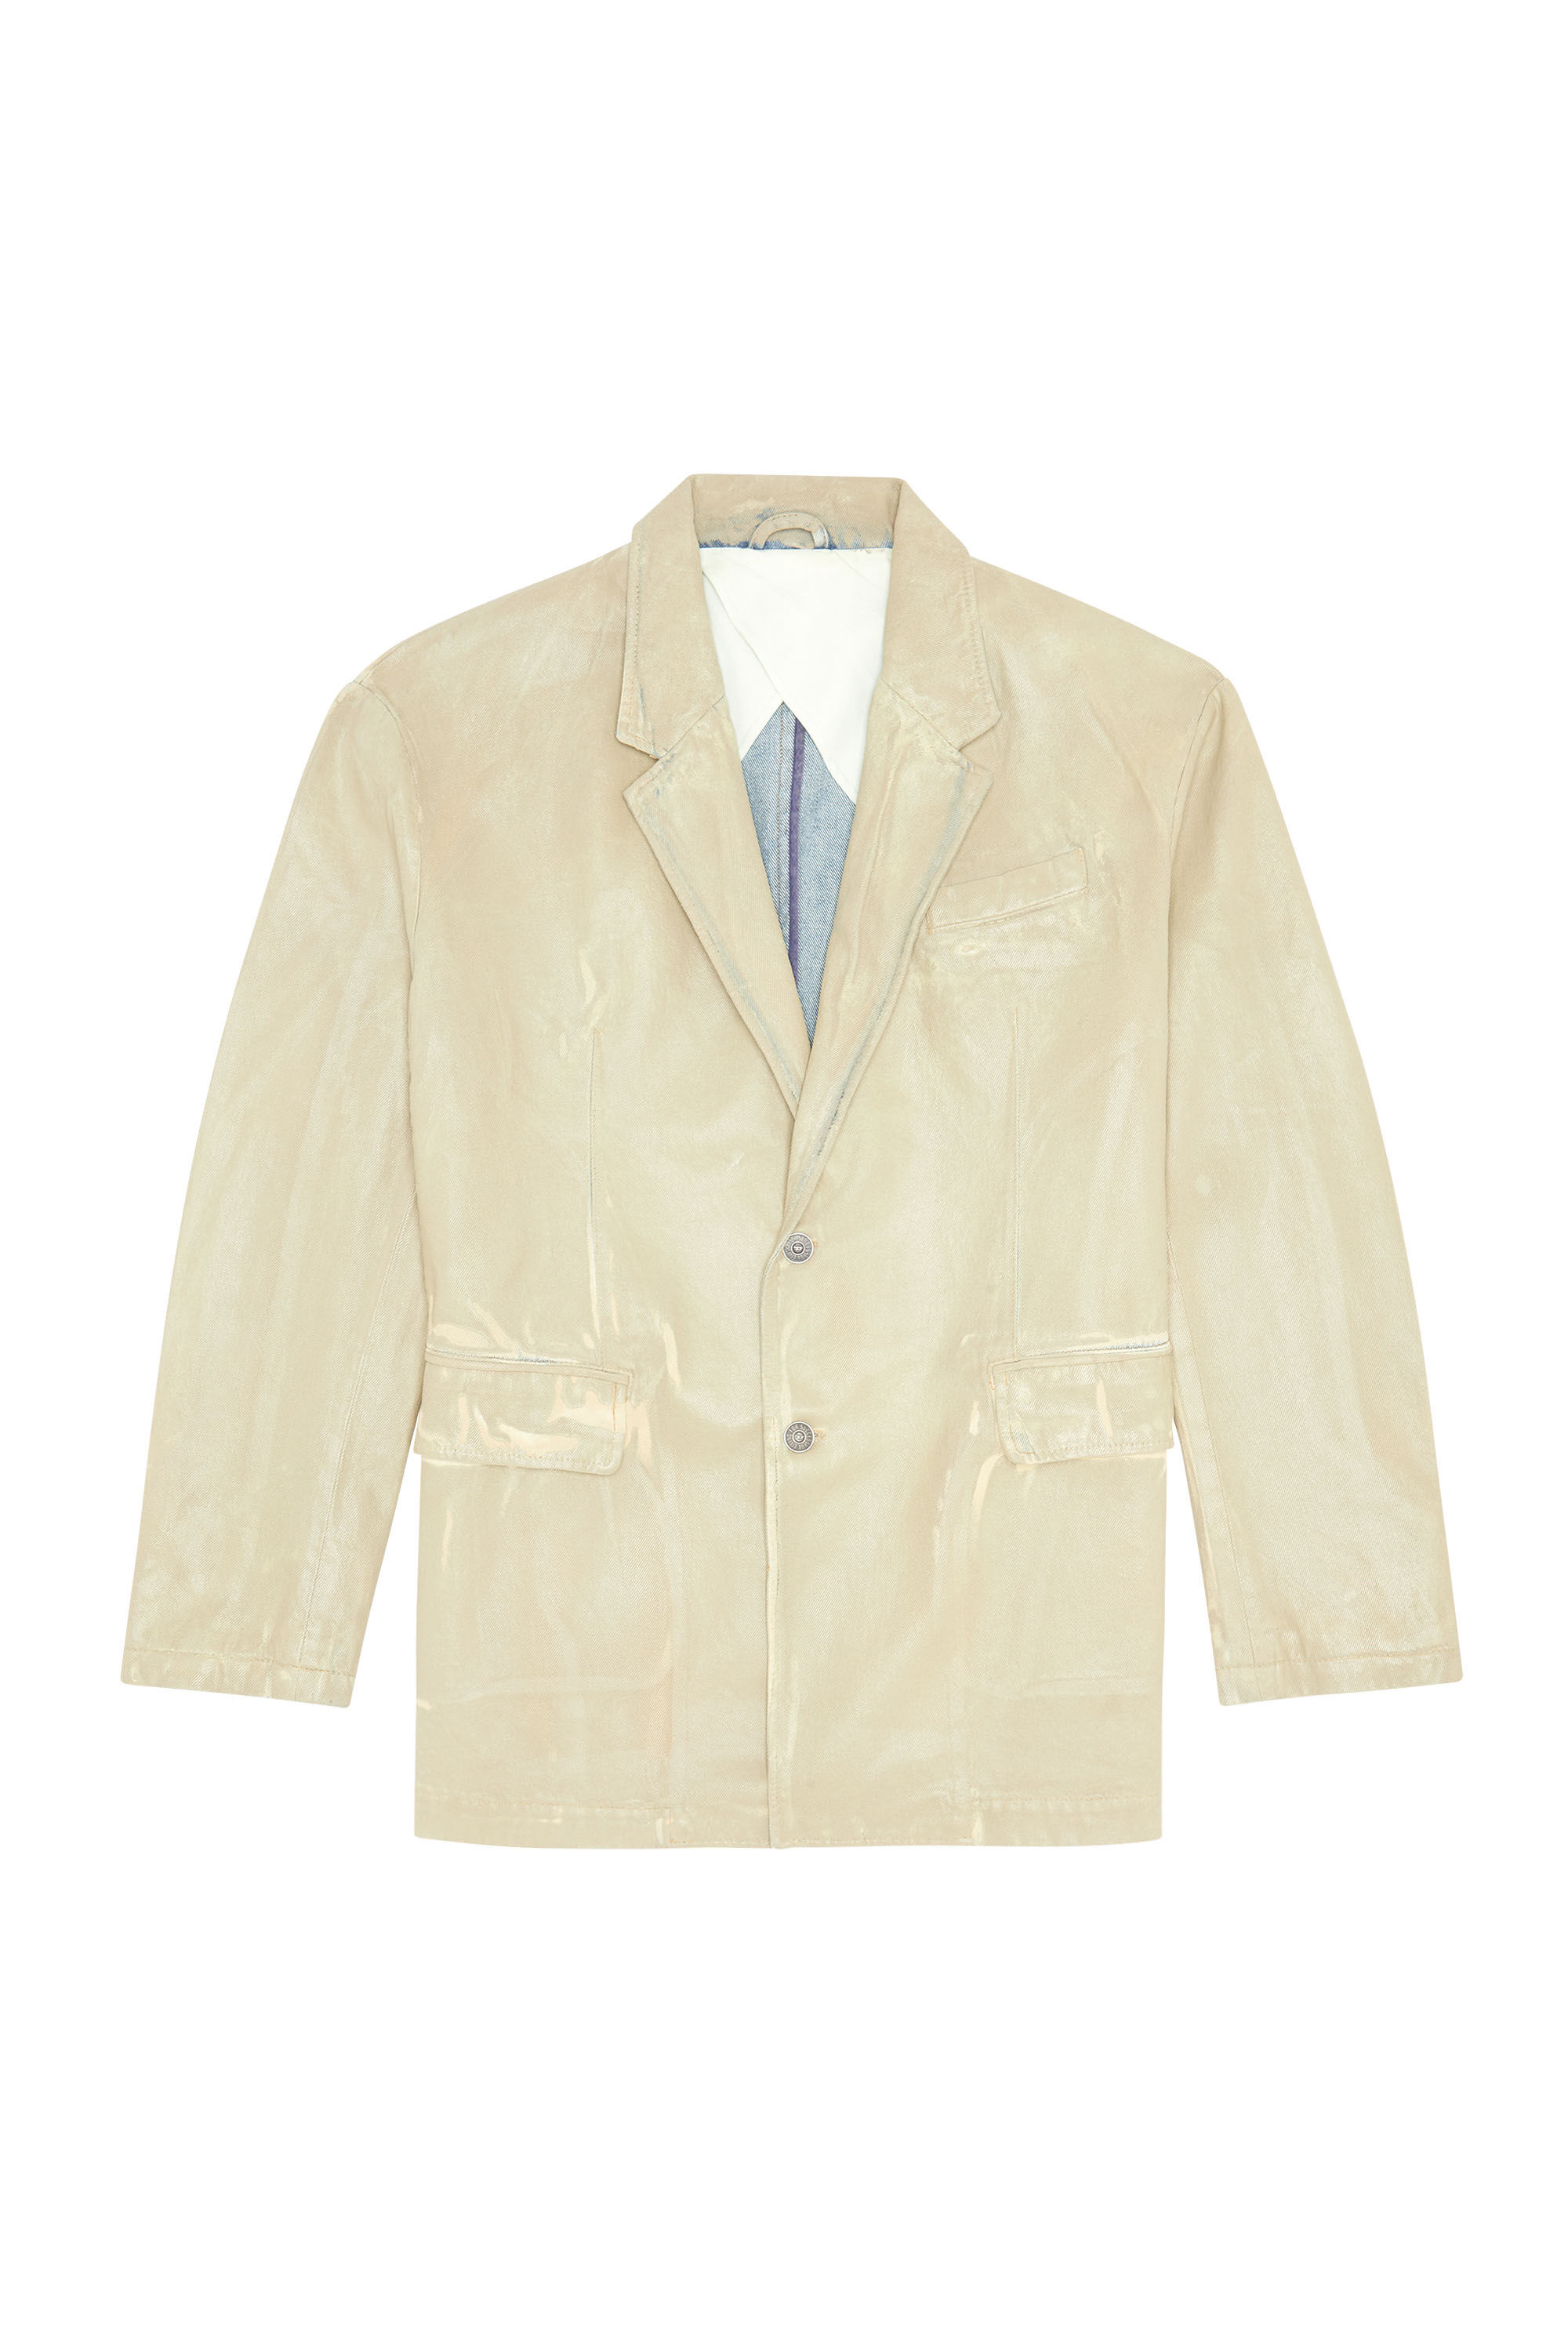 D-BLAZ Man: Two-button blazer features a coated finish | Diesel